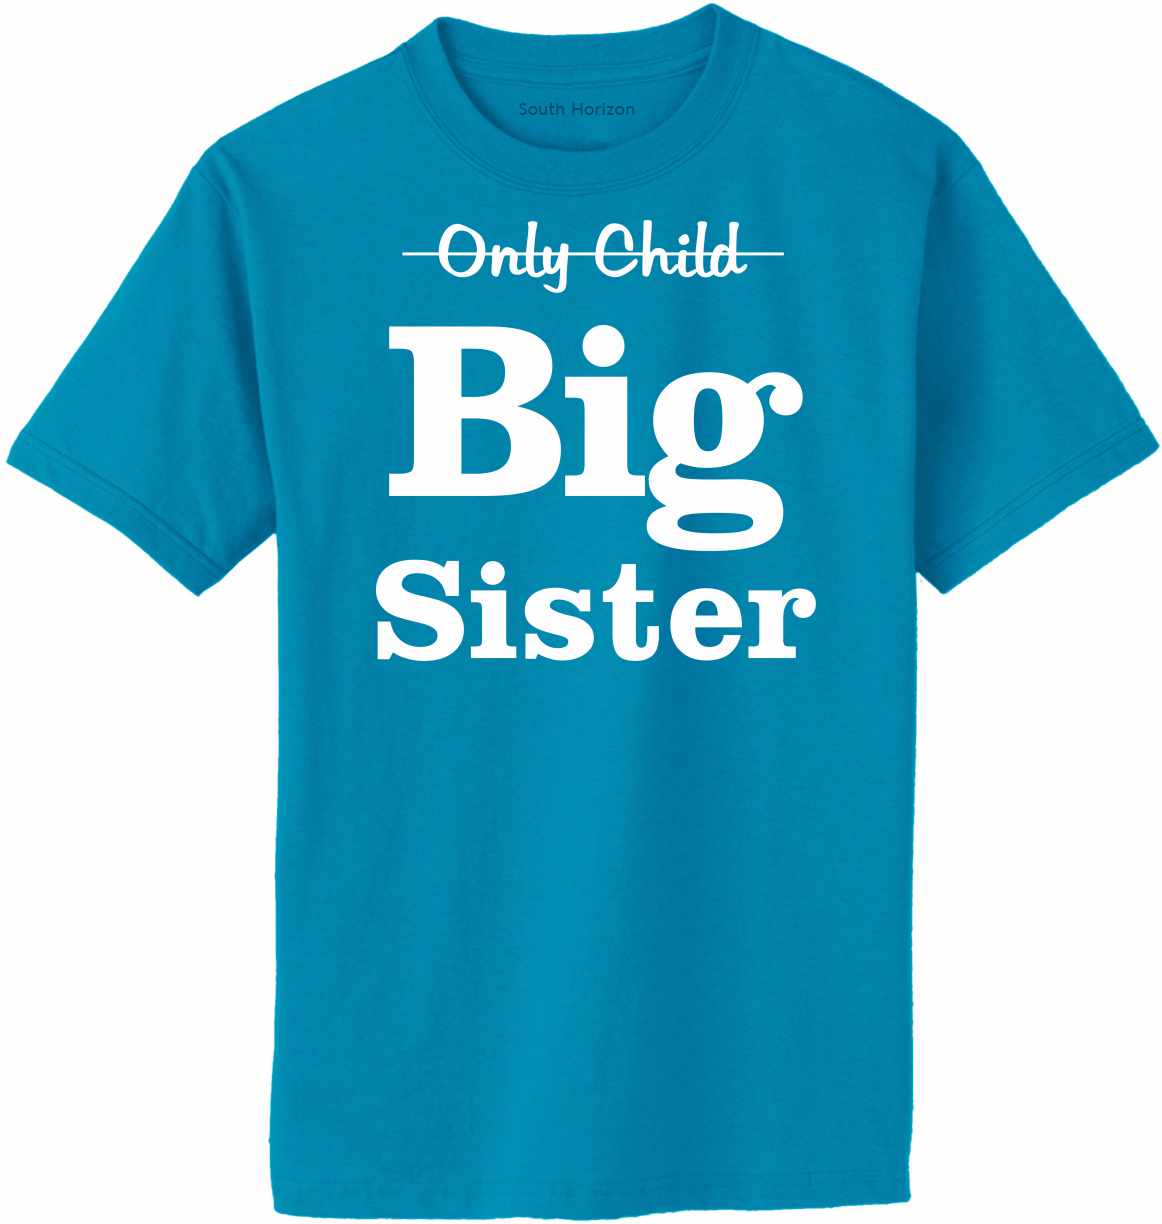 Only Child BIG SISTER on Adult T-Shirt (#967-1)